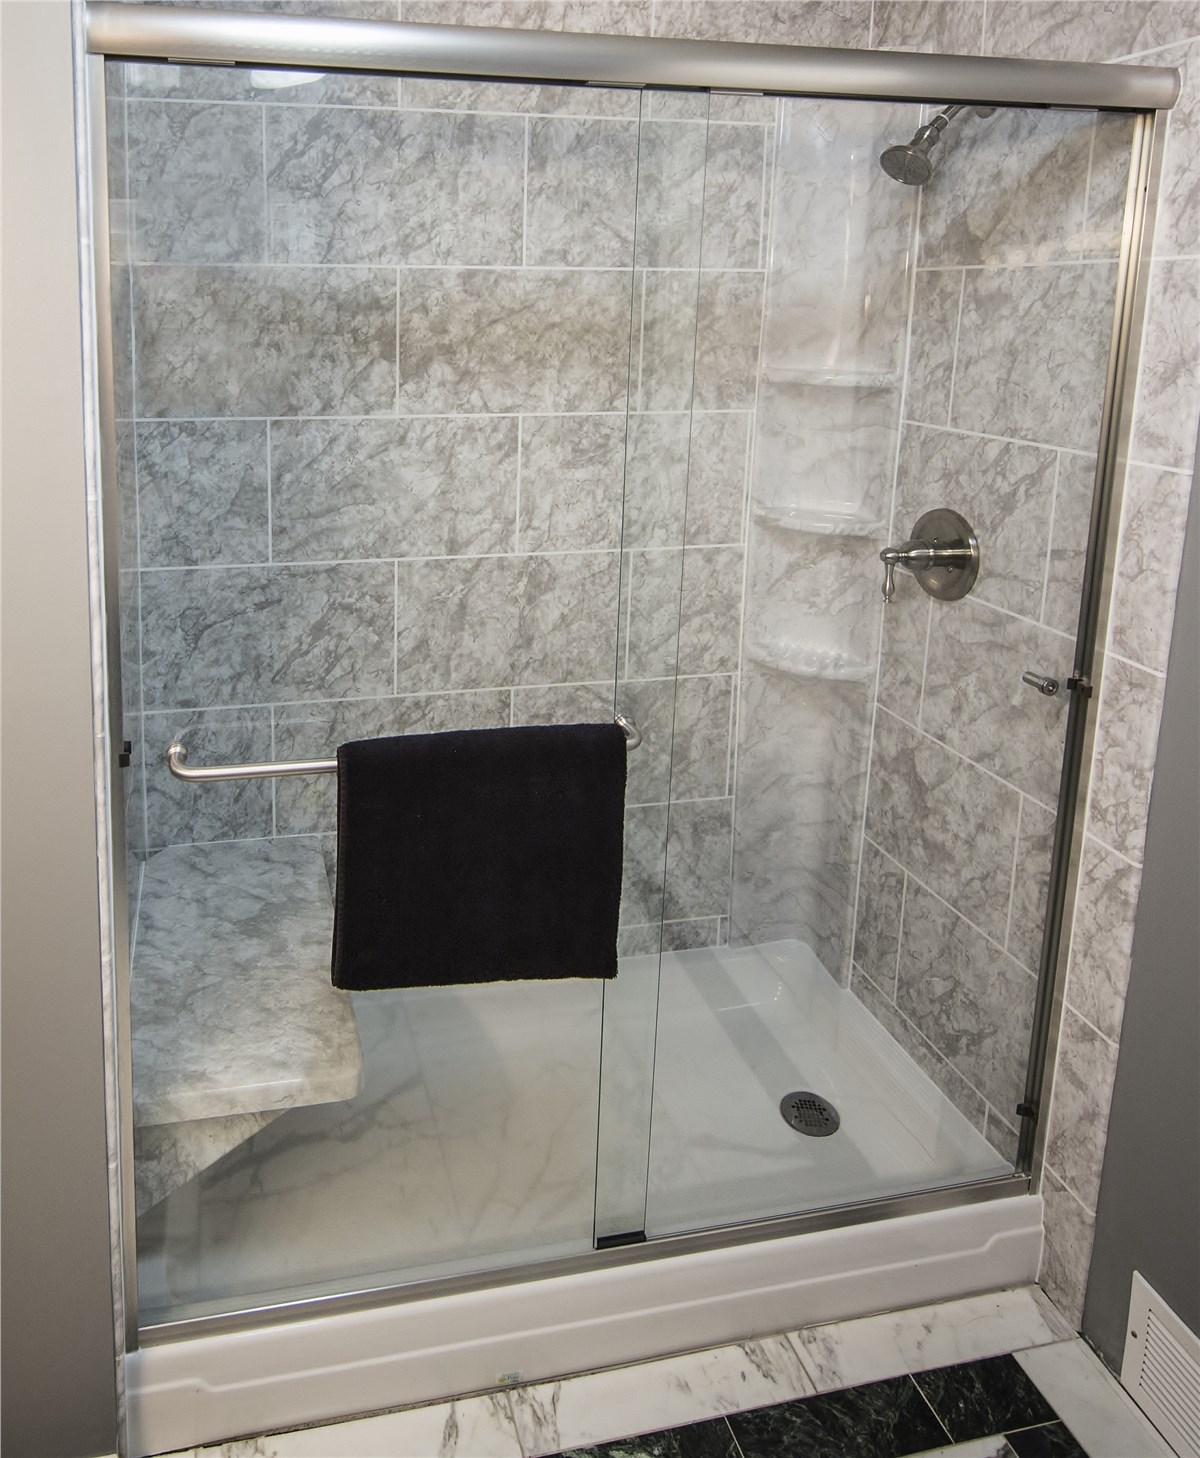 Bathtub To Shower Conversion North Texas Replace Tub With Shower